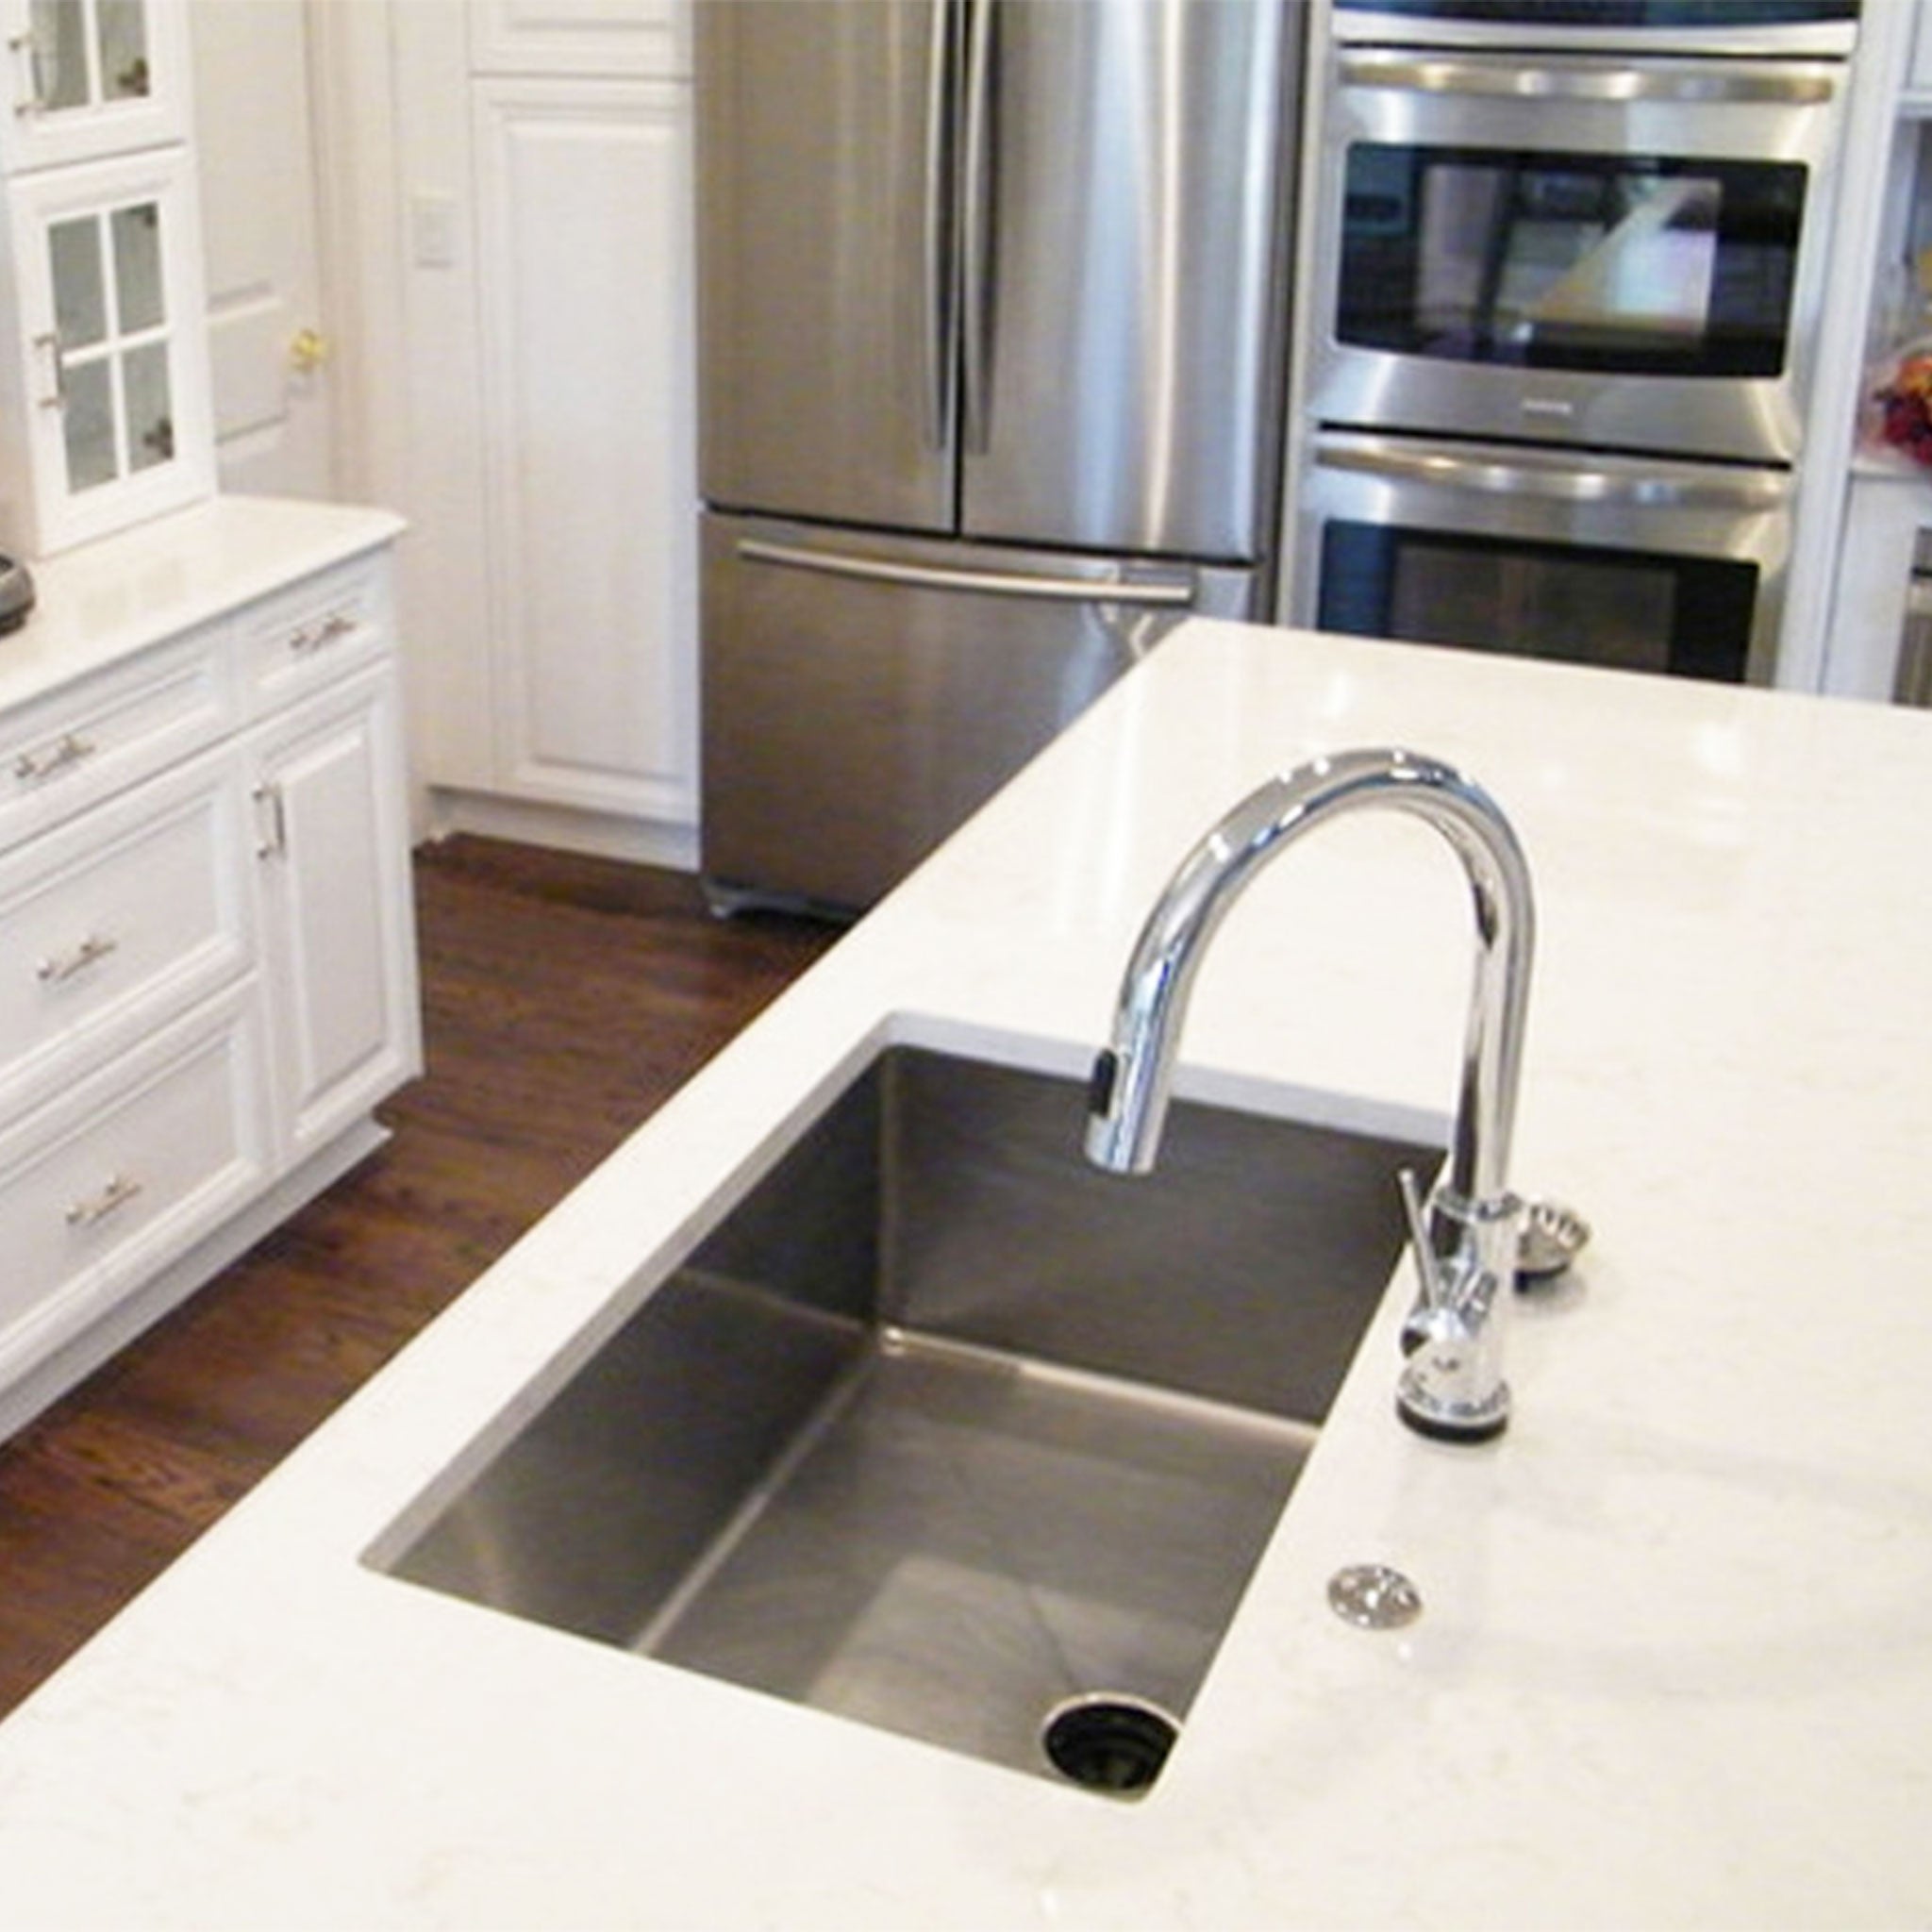 32" one bowl classic sink with a seamless drain.